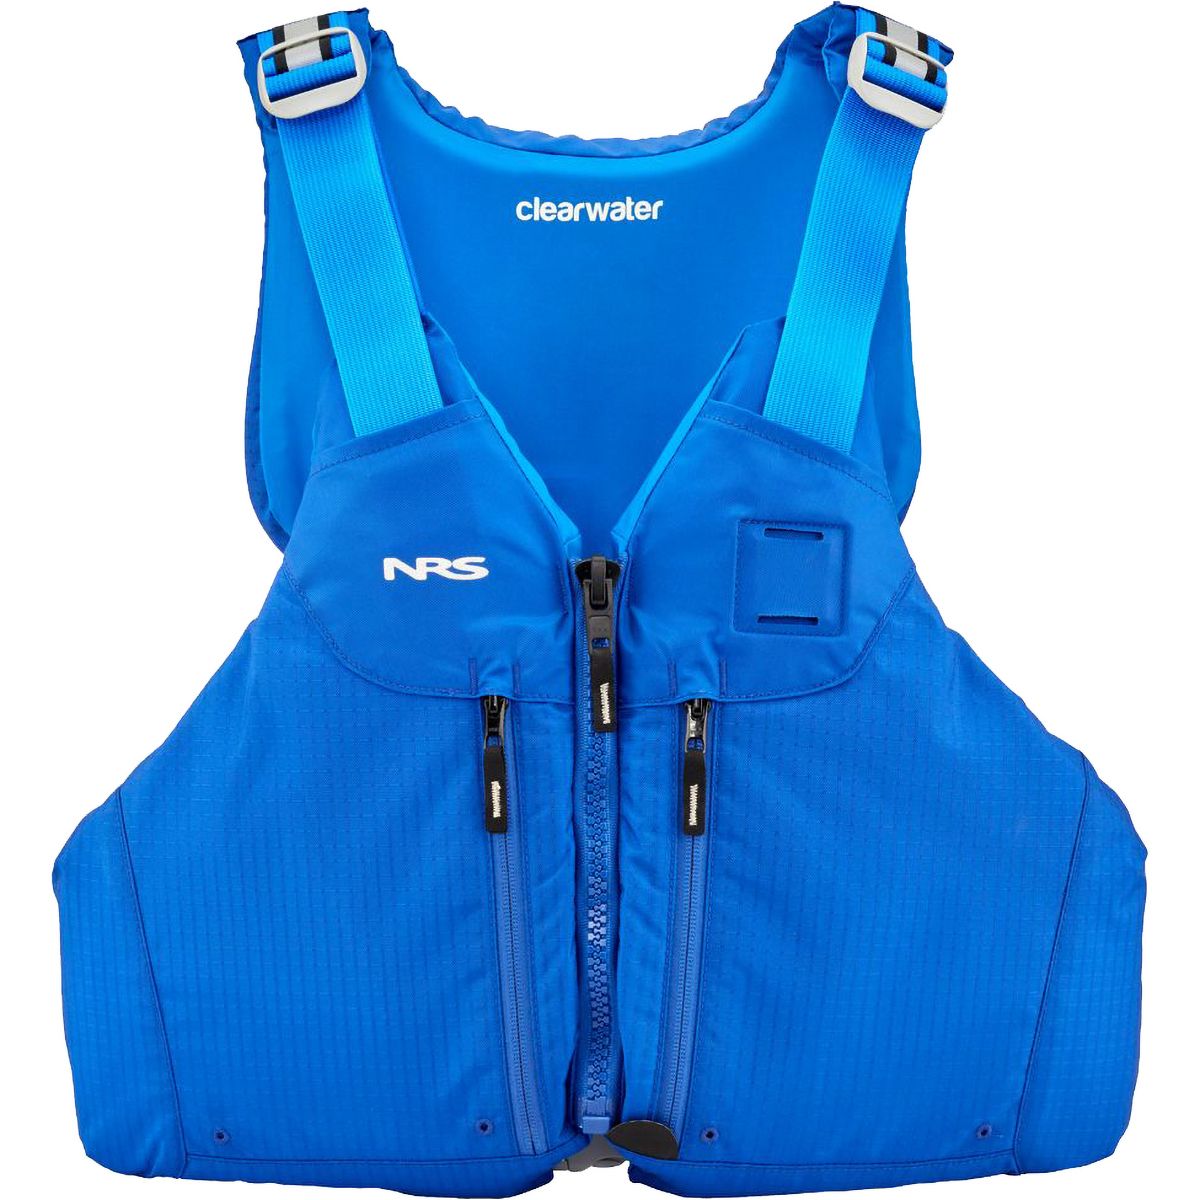 NRS Clearwater Mesh Back Personal Flotation Device